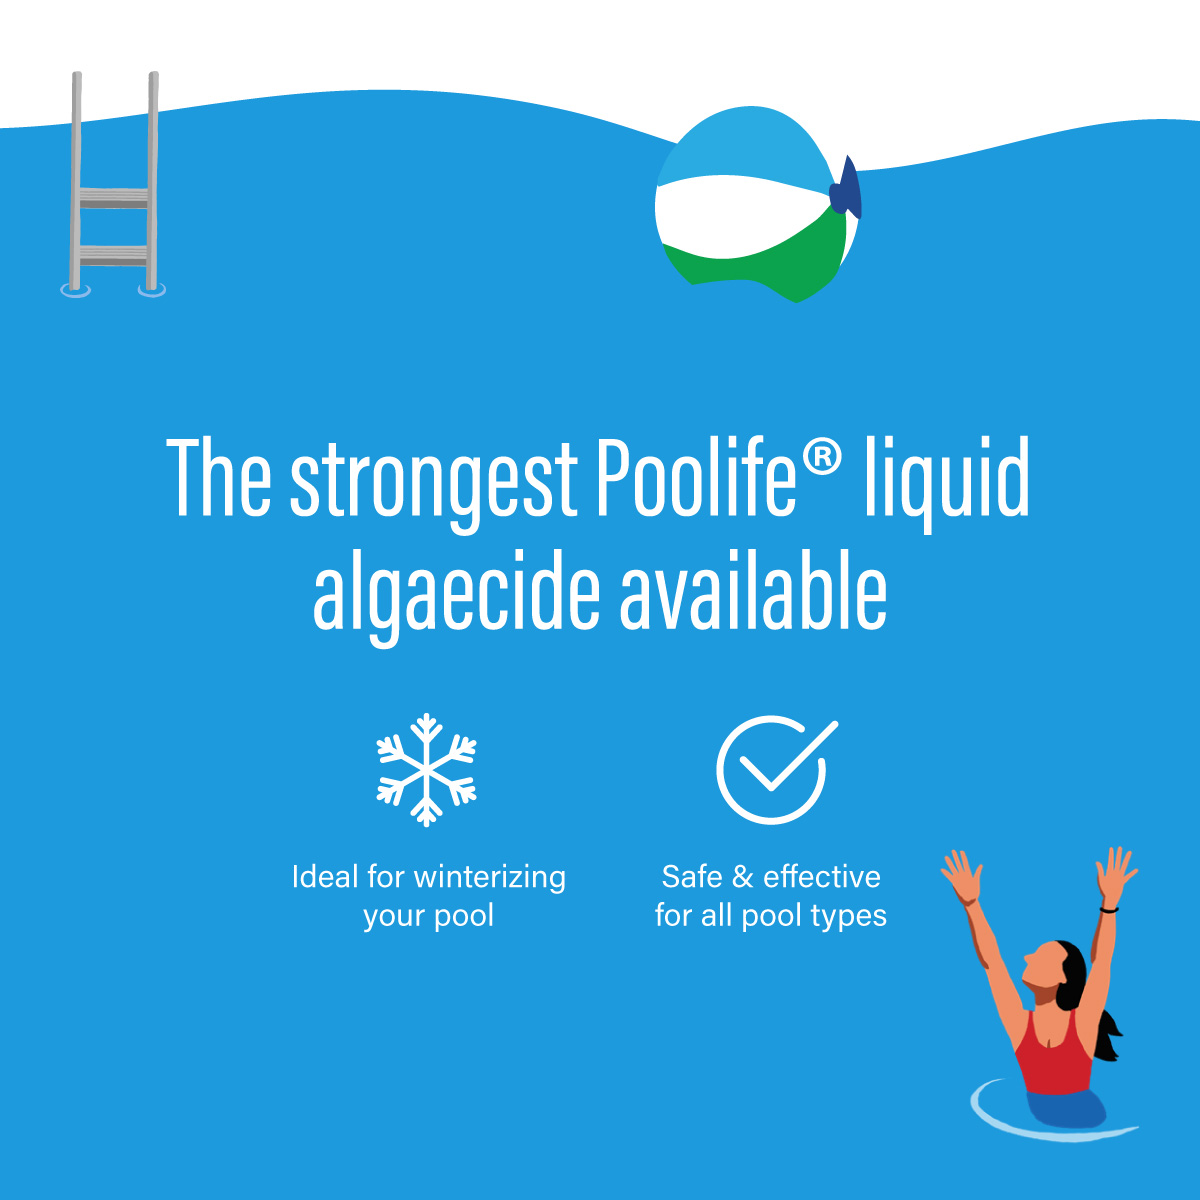 Strongest Poolife liquid algaecide available. Claim "Ideal for winterizing your pool". Claim "Safe and effective for all pool types"